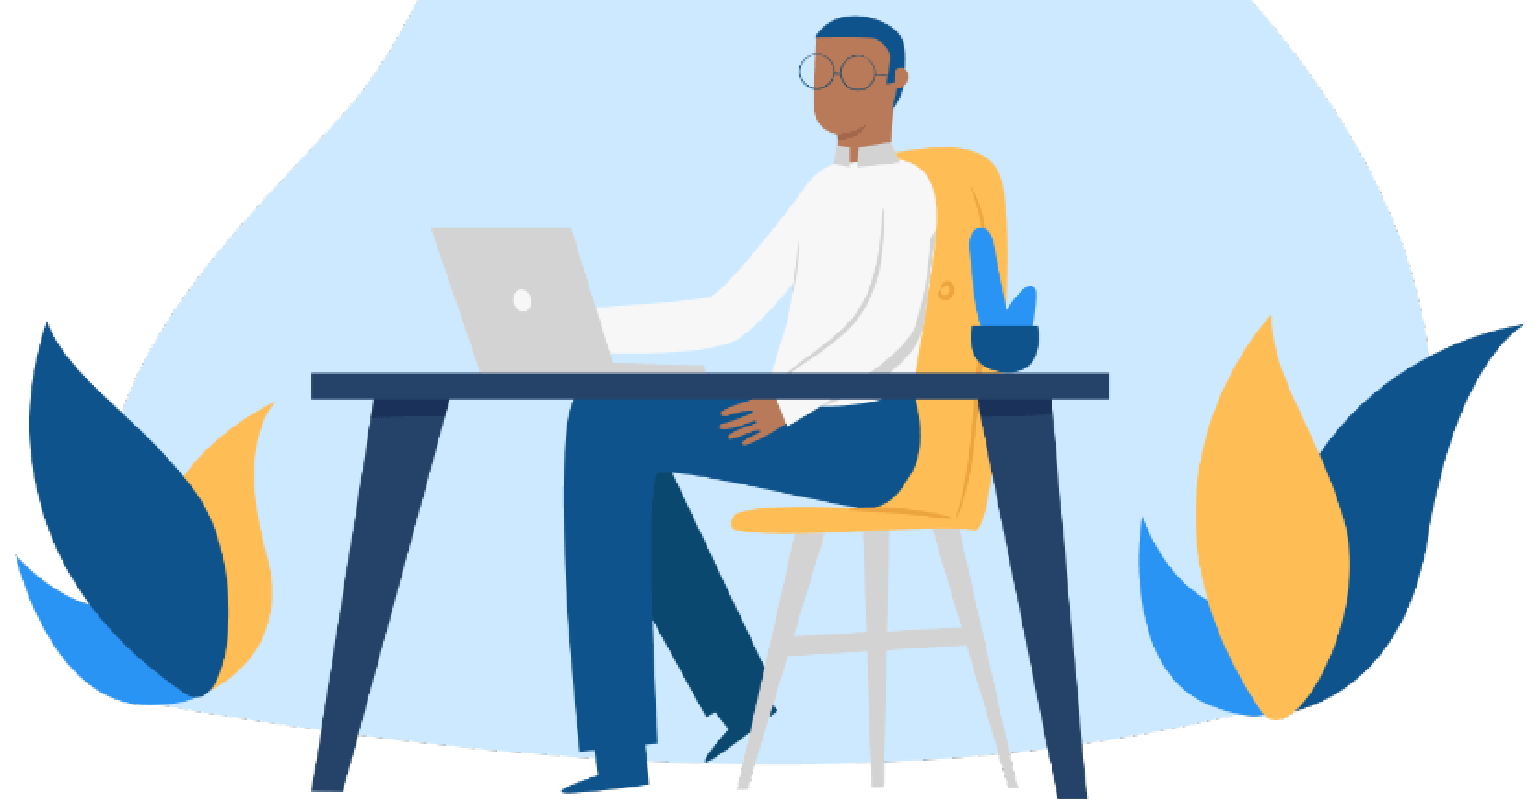 Graphic of a person of color sitting at a desk. They are working on their laptop.